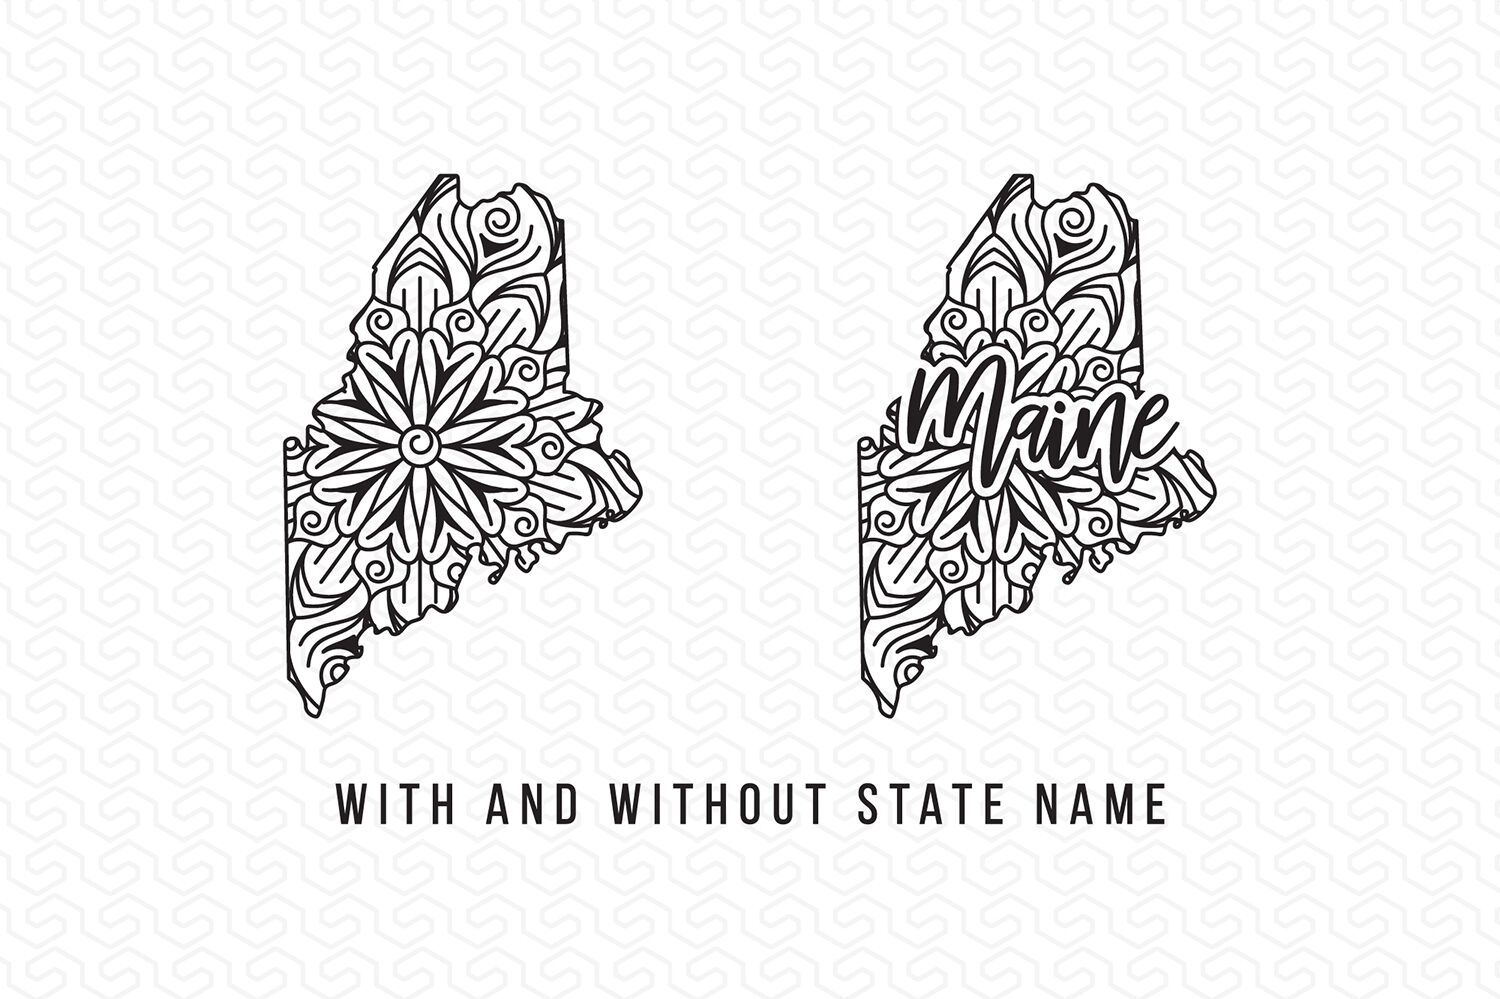 Download Svg Designs State Cutting Files Svg Cut Files Svg File Mandala Svg Svg Files Svg Files For Circut Svg Maine Mandala Svg Cut Files Clip Art Art Collectibles